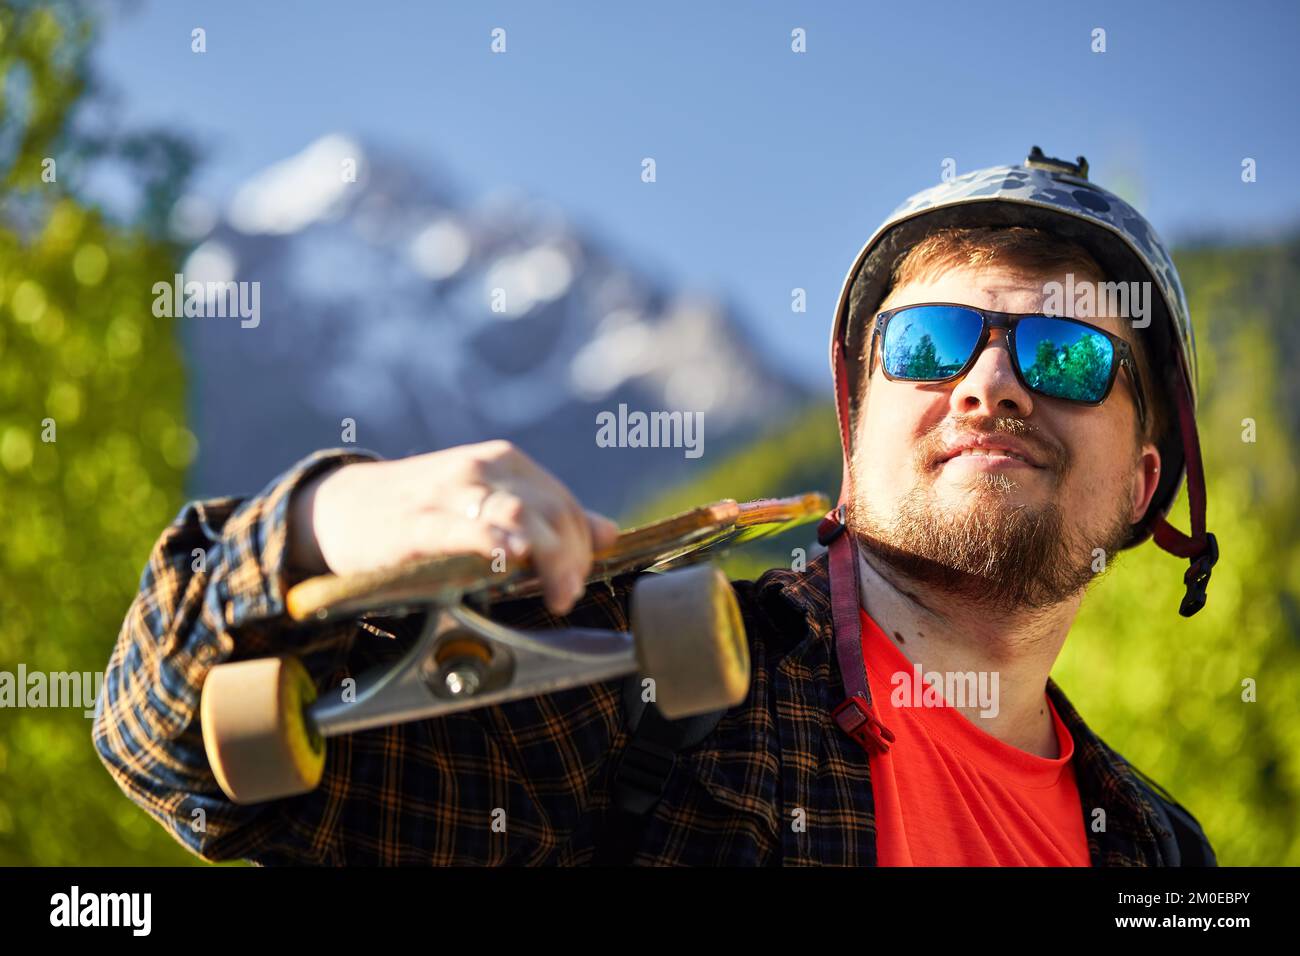 Portrait of serious bearded man Skater with sunglasses and helmet holding his longboard at mountain background Stock Photo